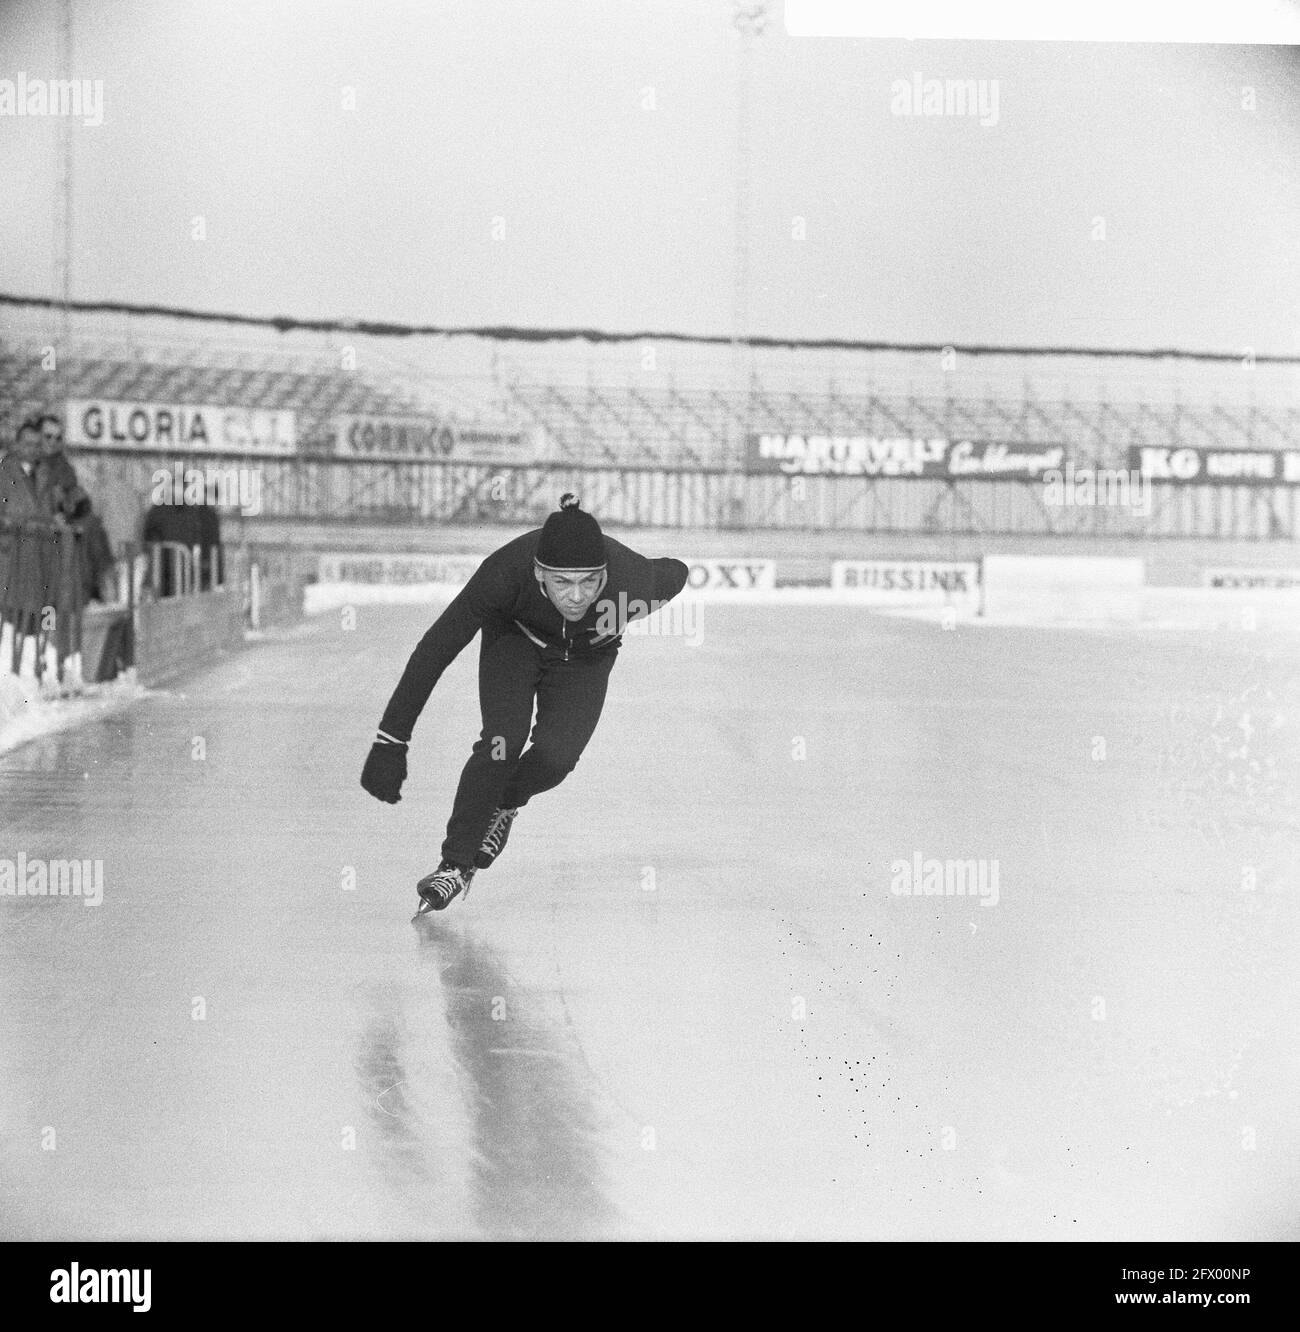 Russian speed skating team had rest day, January 20, 1966, skating, sport, The Netherlands, 20th century press agency photo, news to remember, documentary, historic photography 1945-1990, visual stories, human history of the Twentieth Century, capturing moments in time Stock Photo